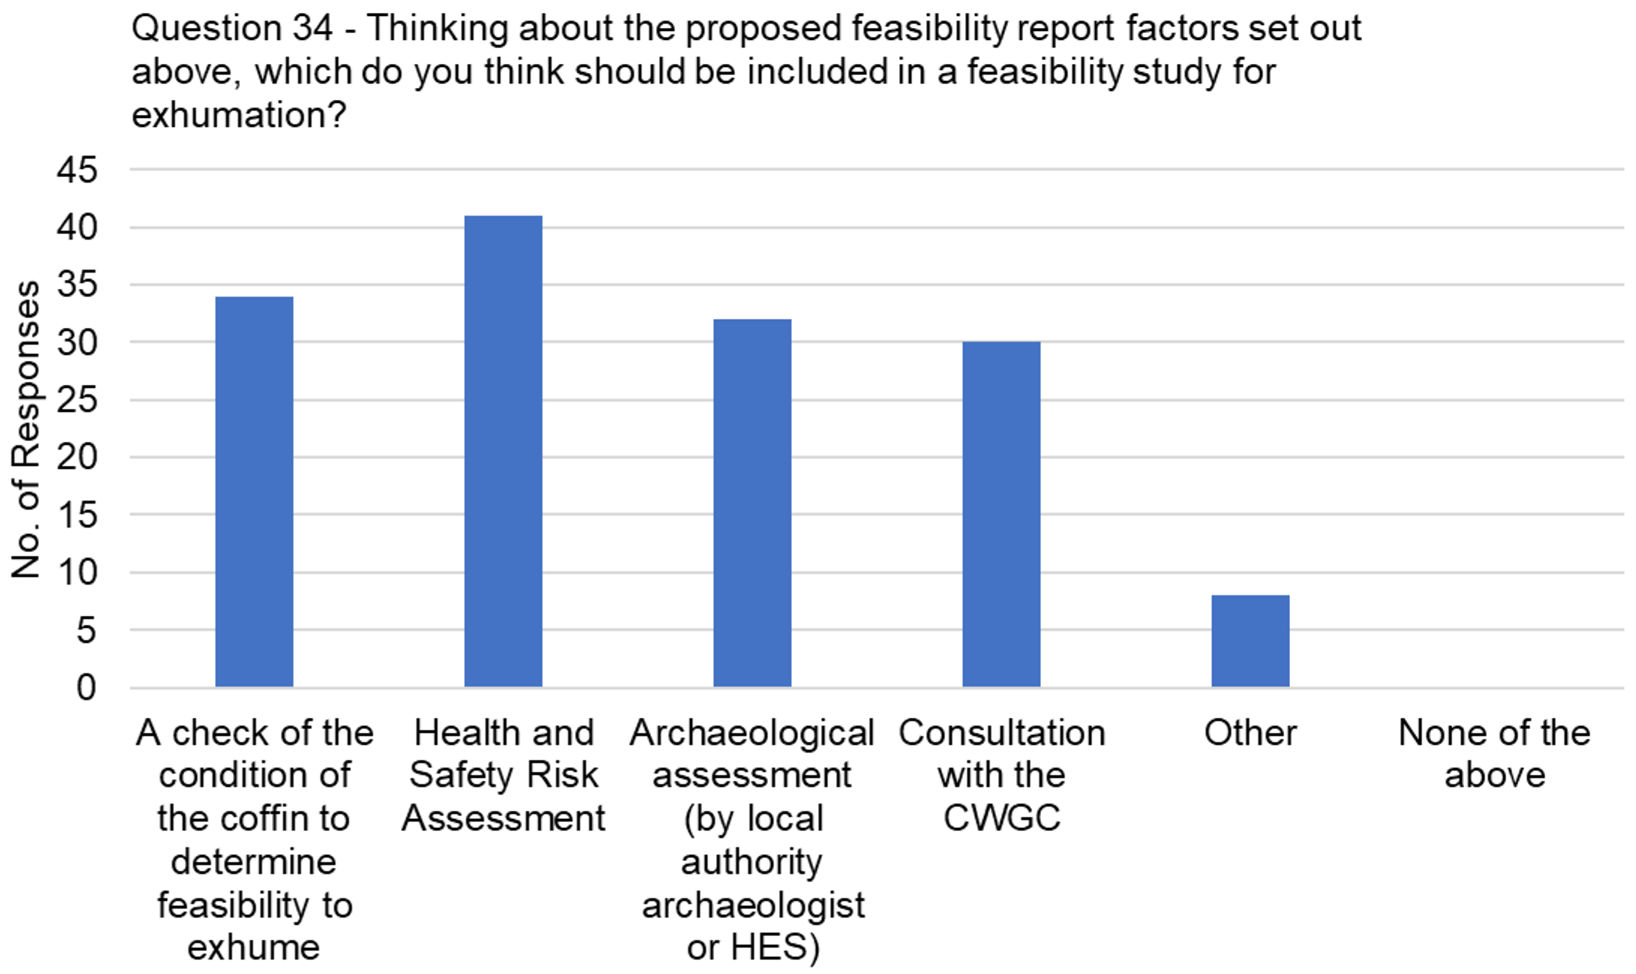 The graph visually presents the data from table 23, focussing on the responses to the question, "Thinking about the proposed feasibility report factors set out in the information box below, which do you think should be included in a feasibility study for exhumation?"